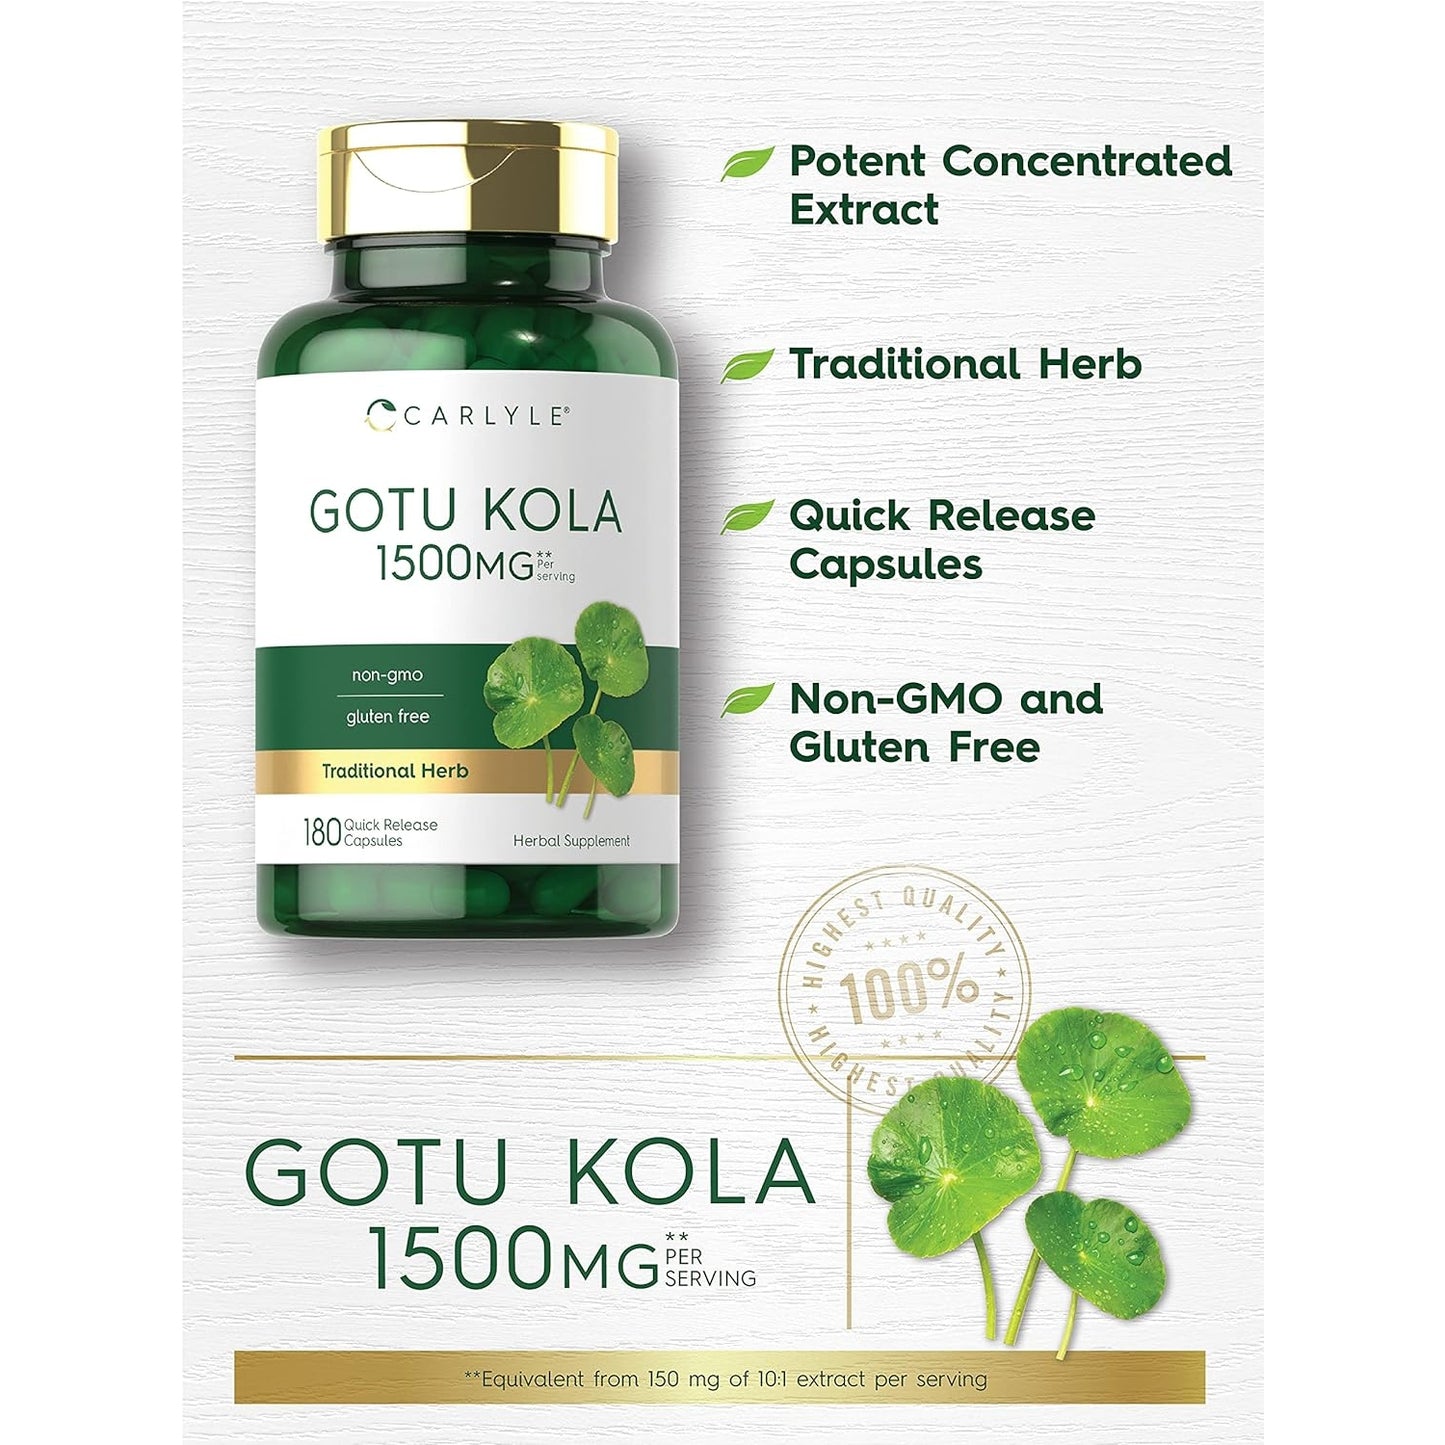 Carlyle Gotu Kola Capsules 1500mg | 180 Count | Non-GMO, Gluten Free | Traditional Herb Extract - Medaid - Lebanon